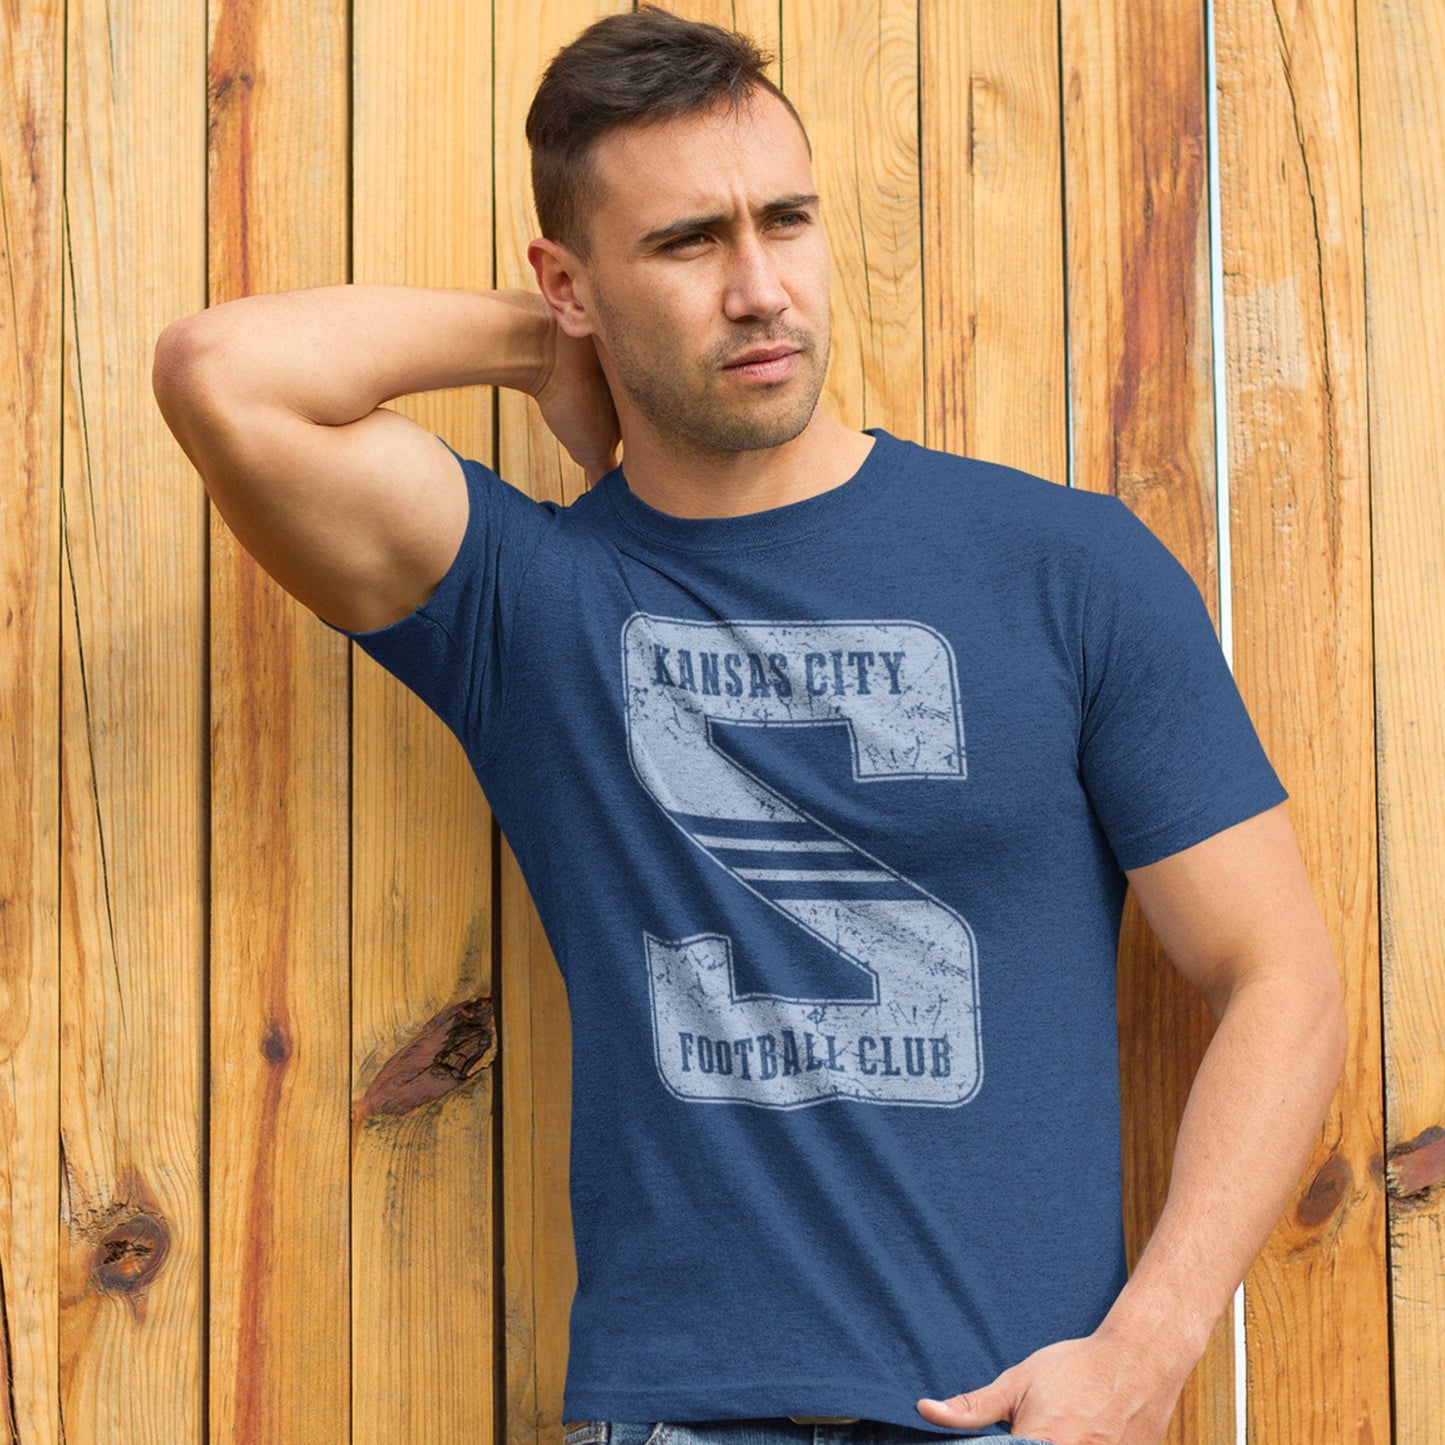 KC Swag Sporting Kansas City light blue KANSAS CITY FOOTBALL CLUB on giant striped S on heather navy t-shirt worn by male model leaning on wood fence